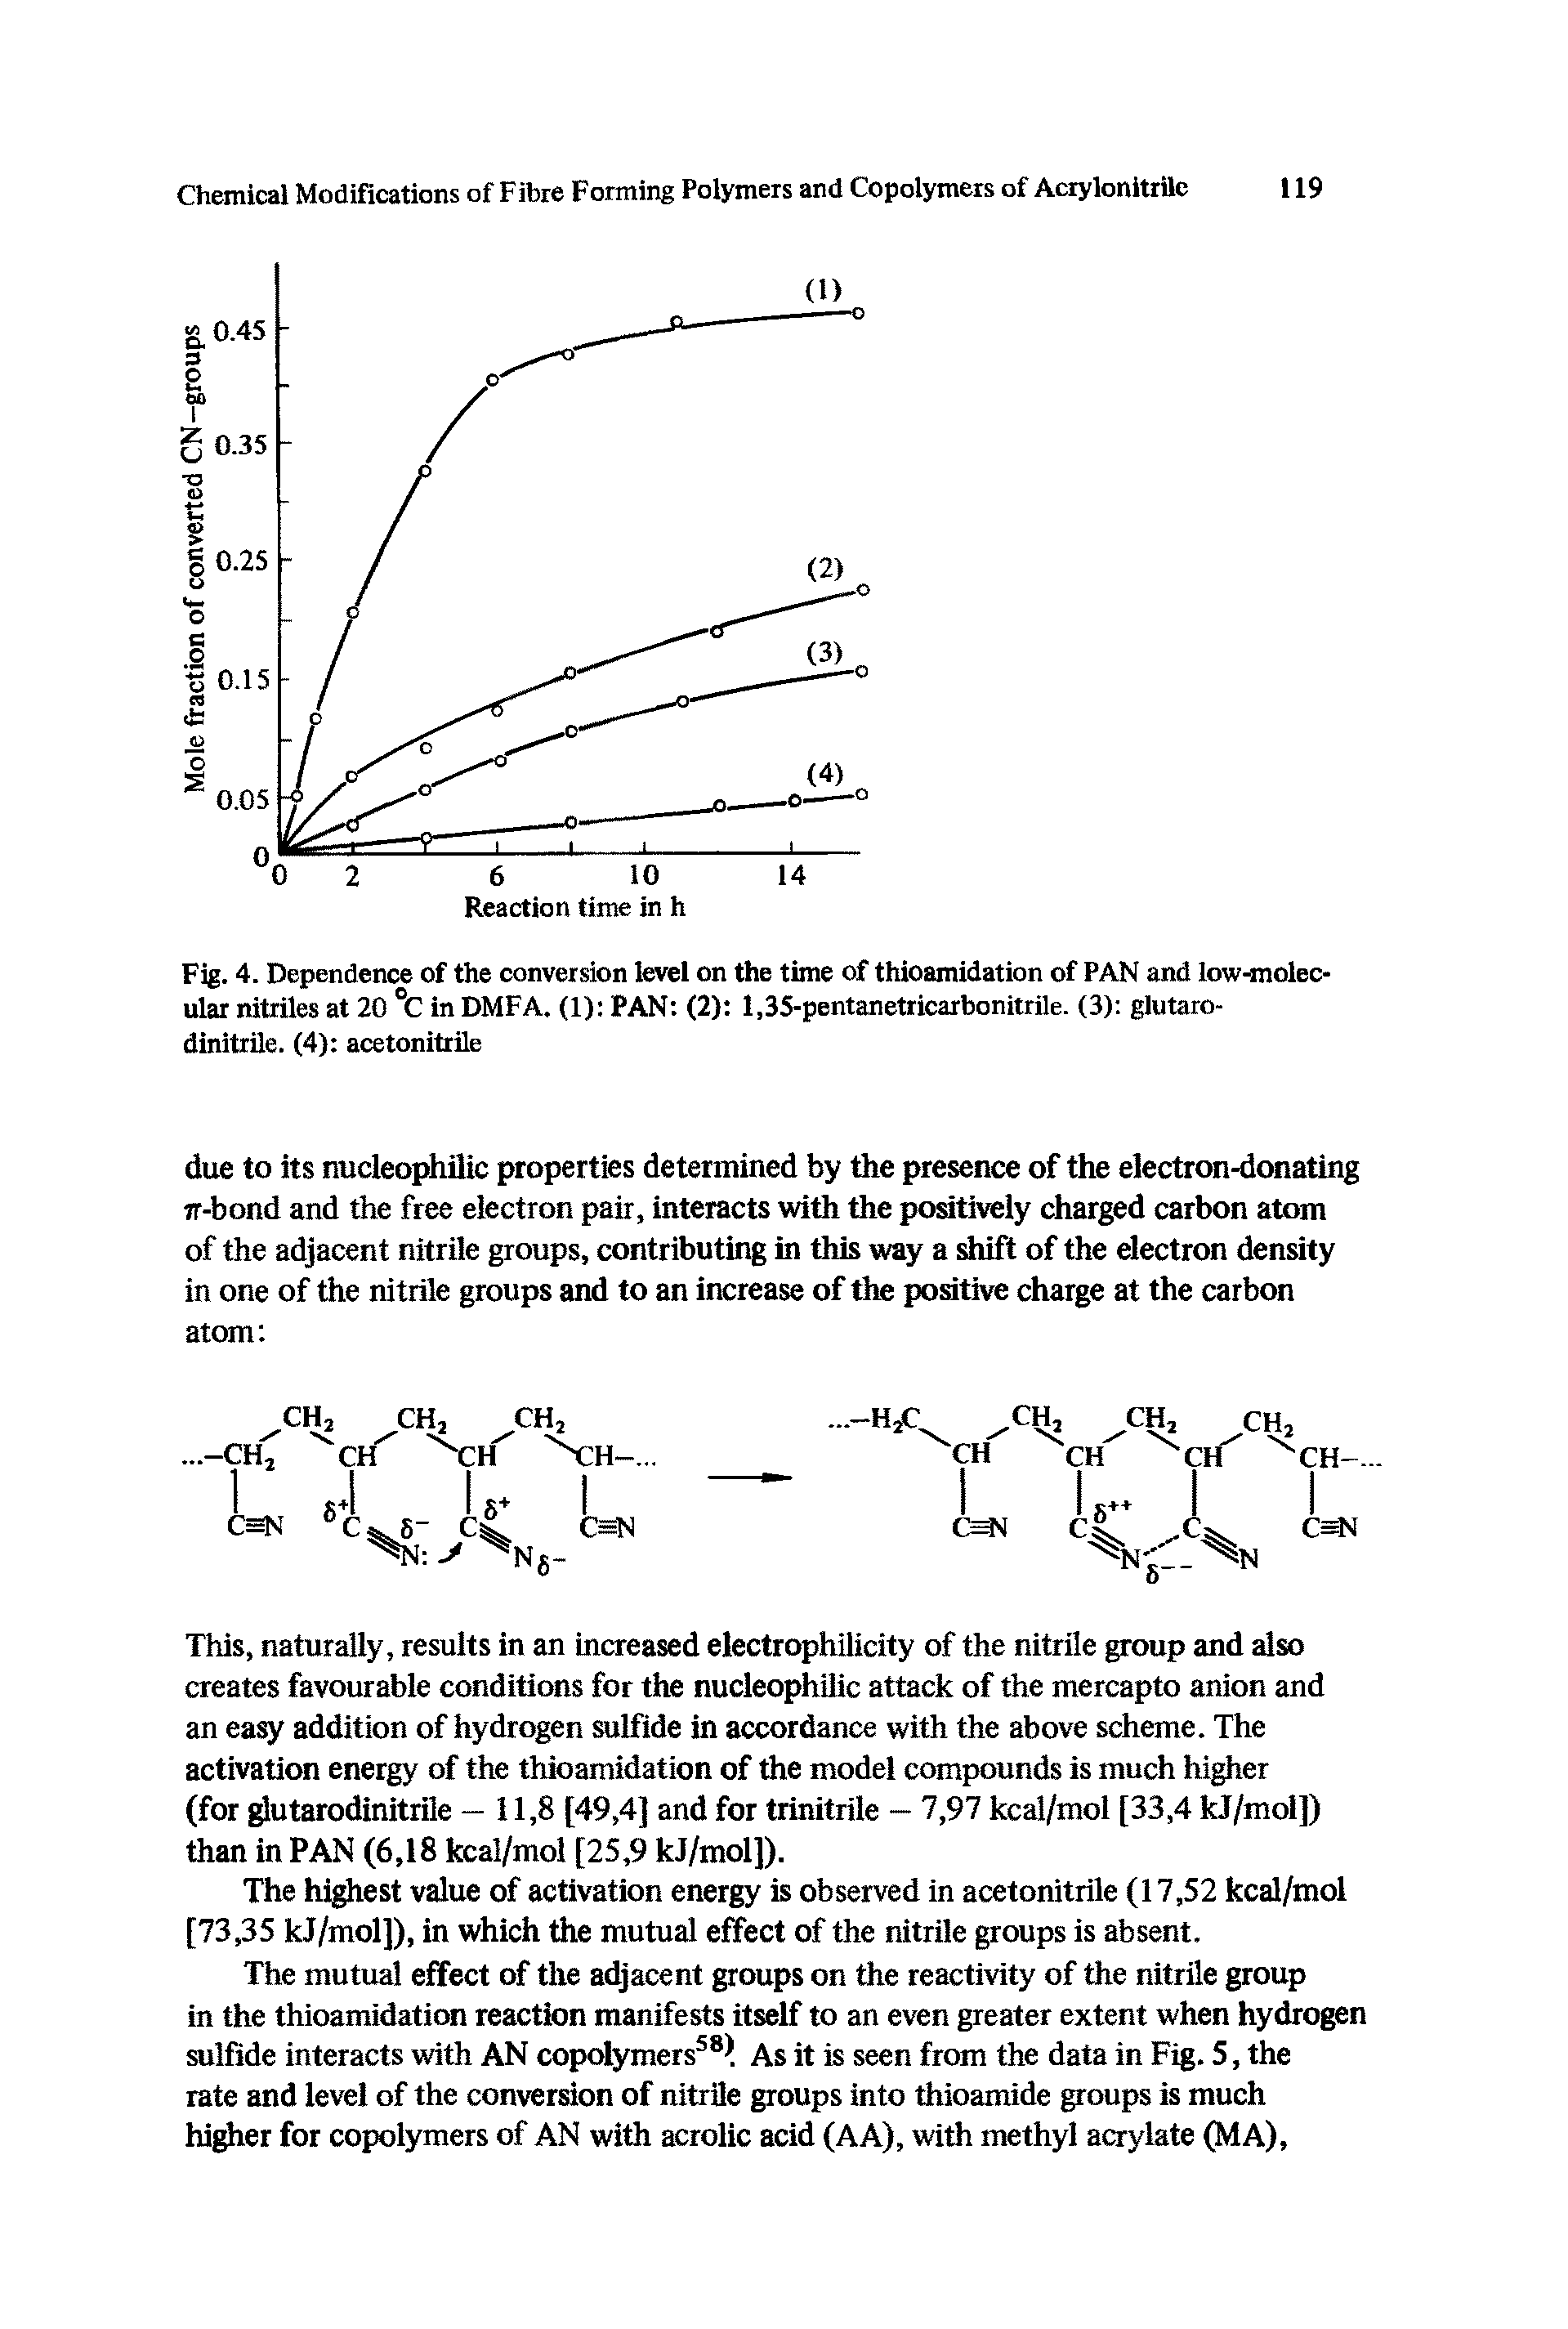 Fig. 4. Dependence of the conversion level on the time of thioamidation of PAN and low-molecular nitriles at 20 °C in DMFA. (1) PAN (2) 1,35-pentanetricarbonitrile. (3) glutaro-dinitrile. (4) acetonitrile...